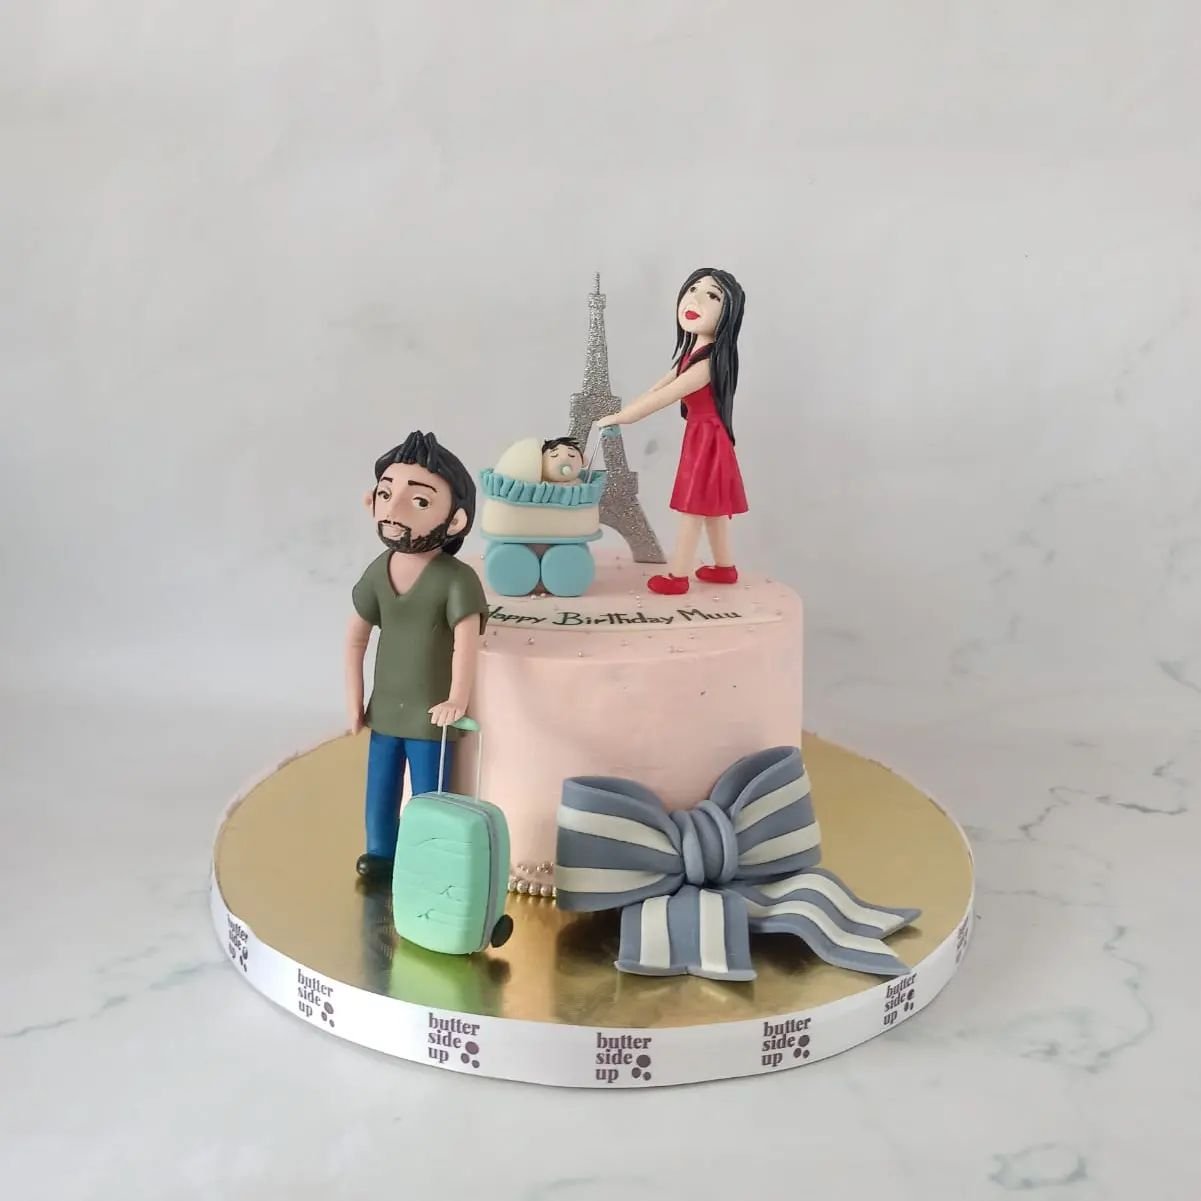 Baby on board and a trip to Paris

Customized cakes bangalore, buttercream cakes, Eiffel tower, vacation mode